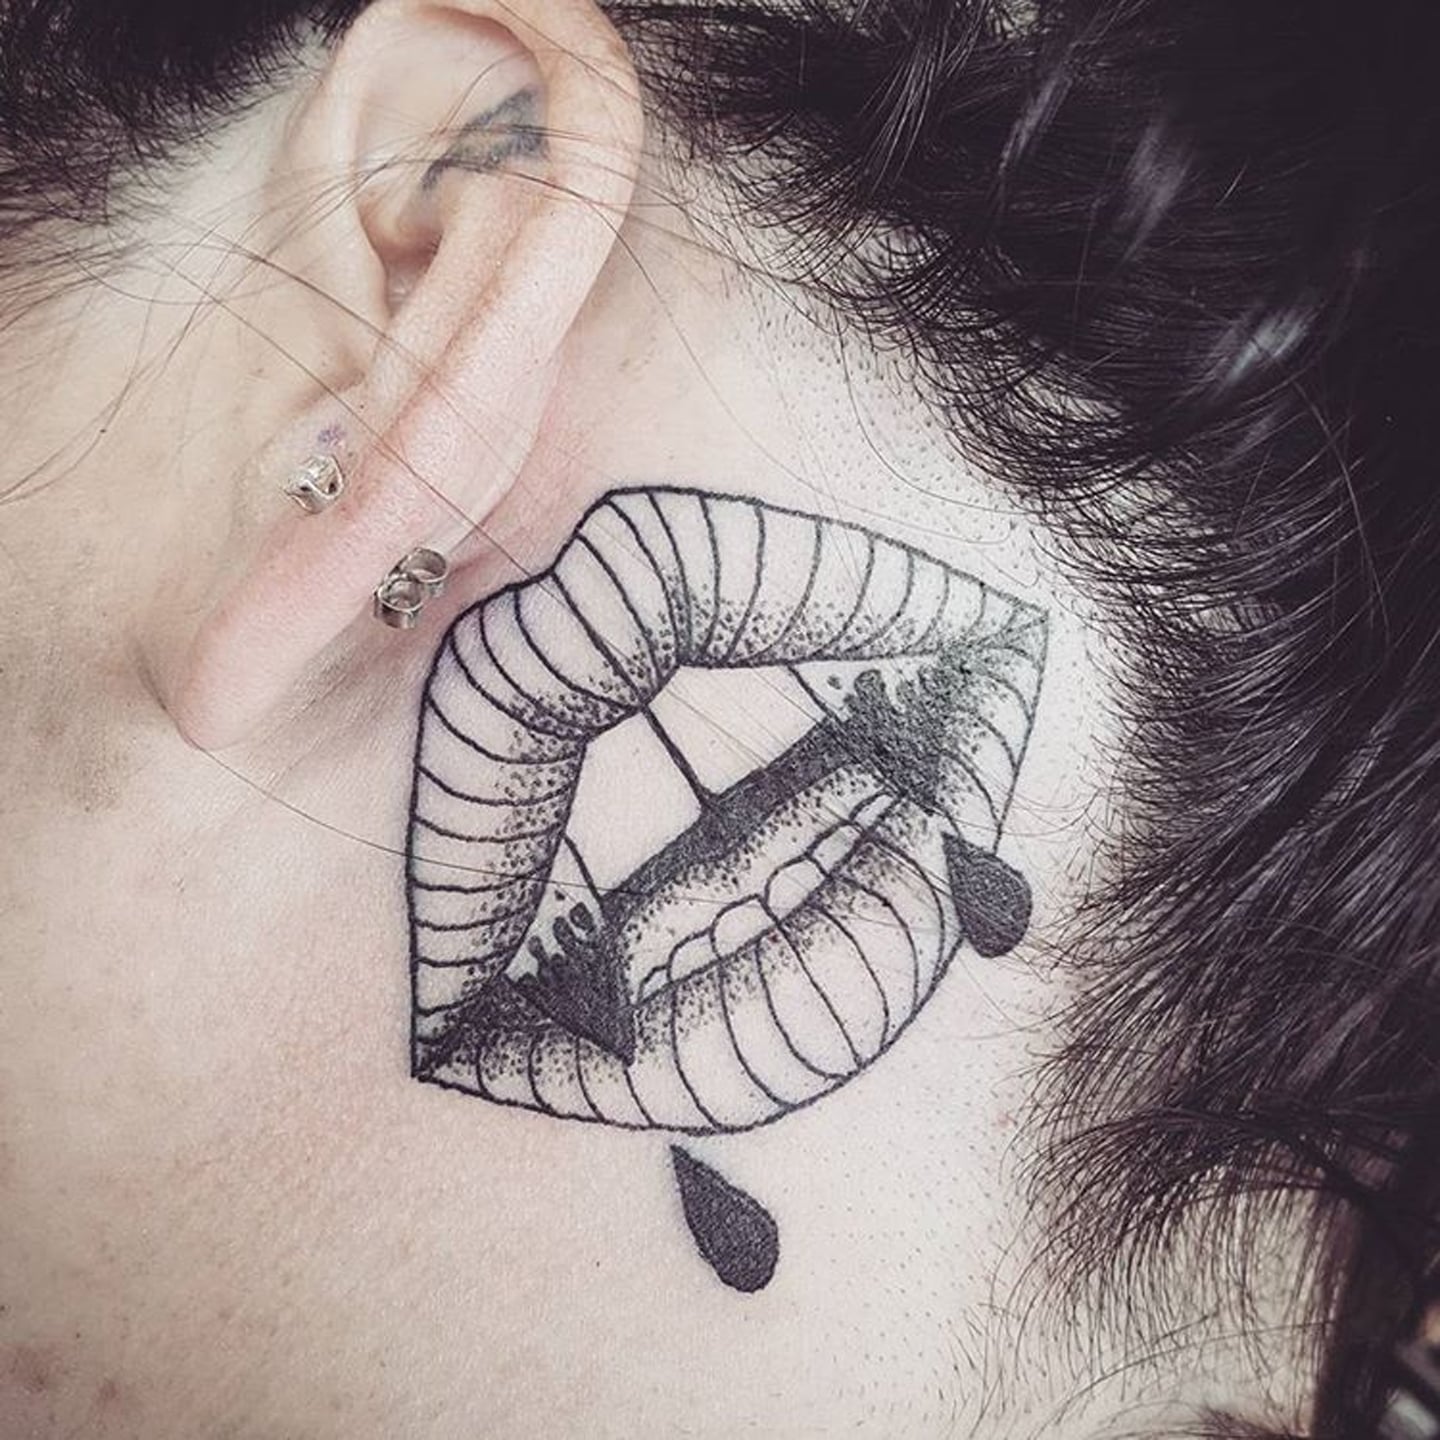 23 Best Halloween Tattoos  Creepy and Traditional Tattoos